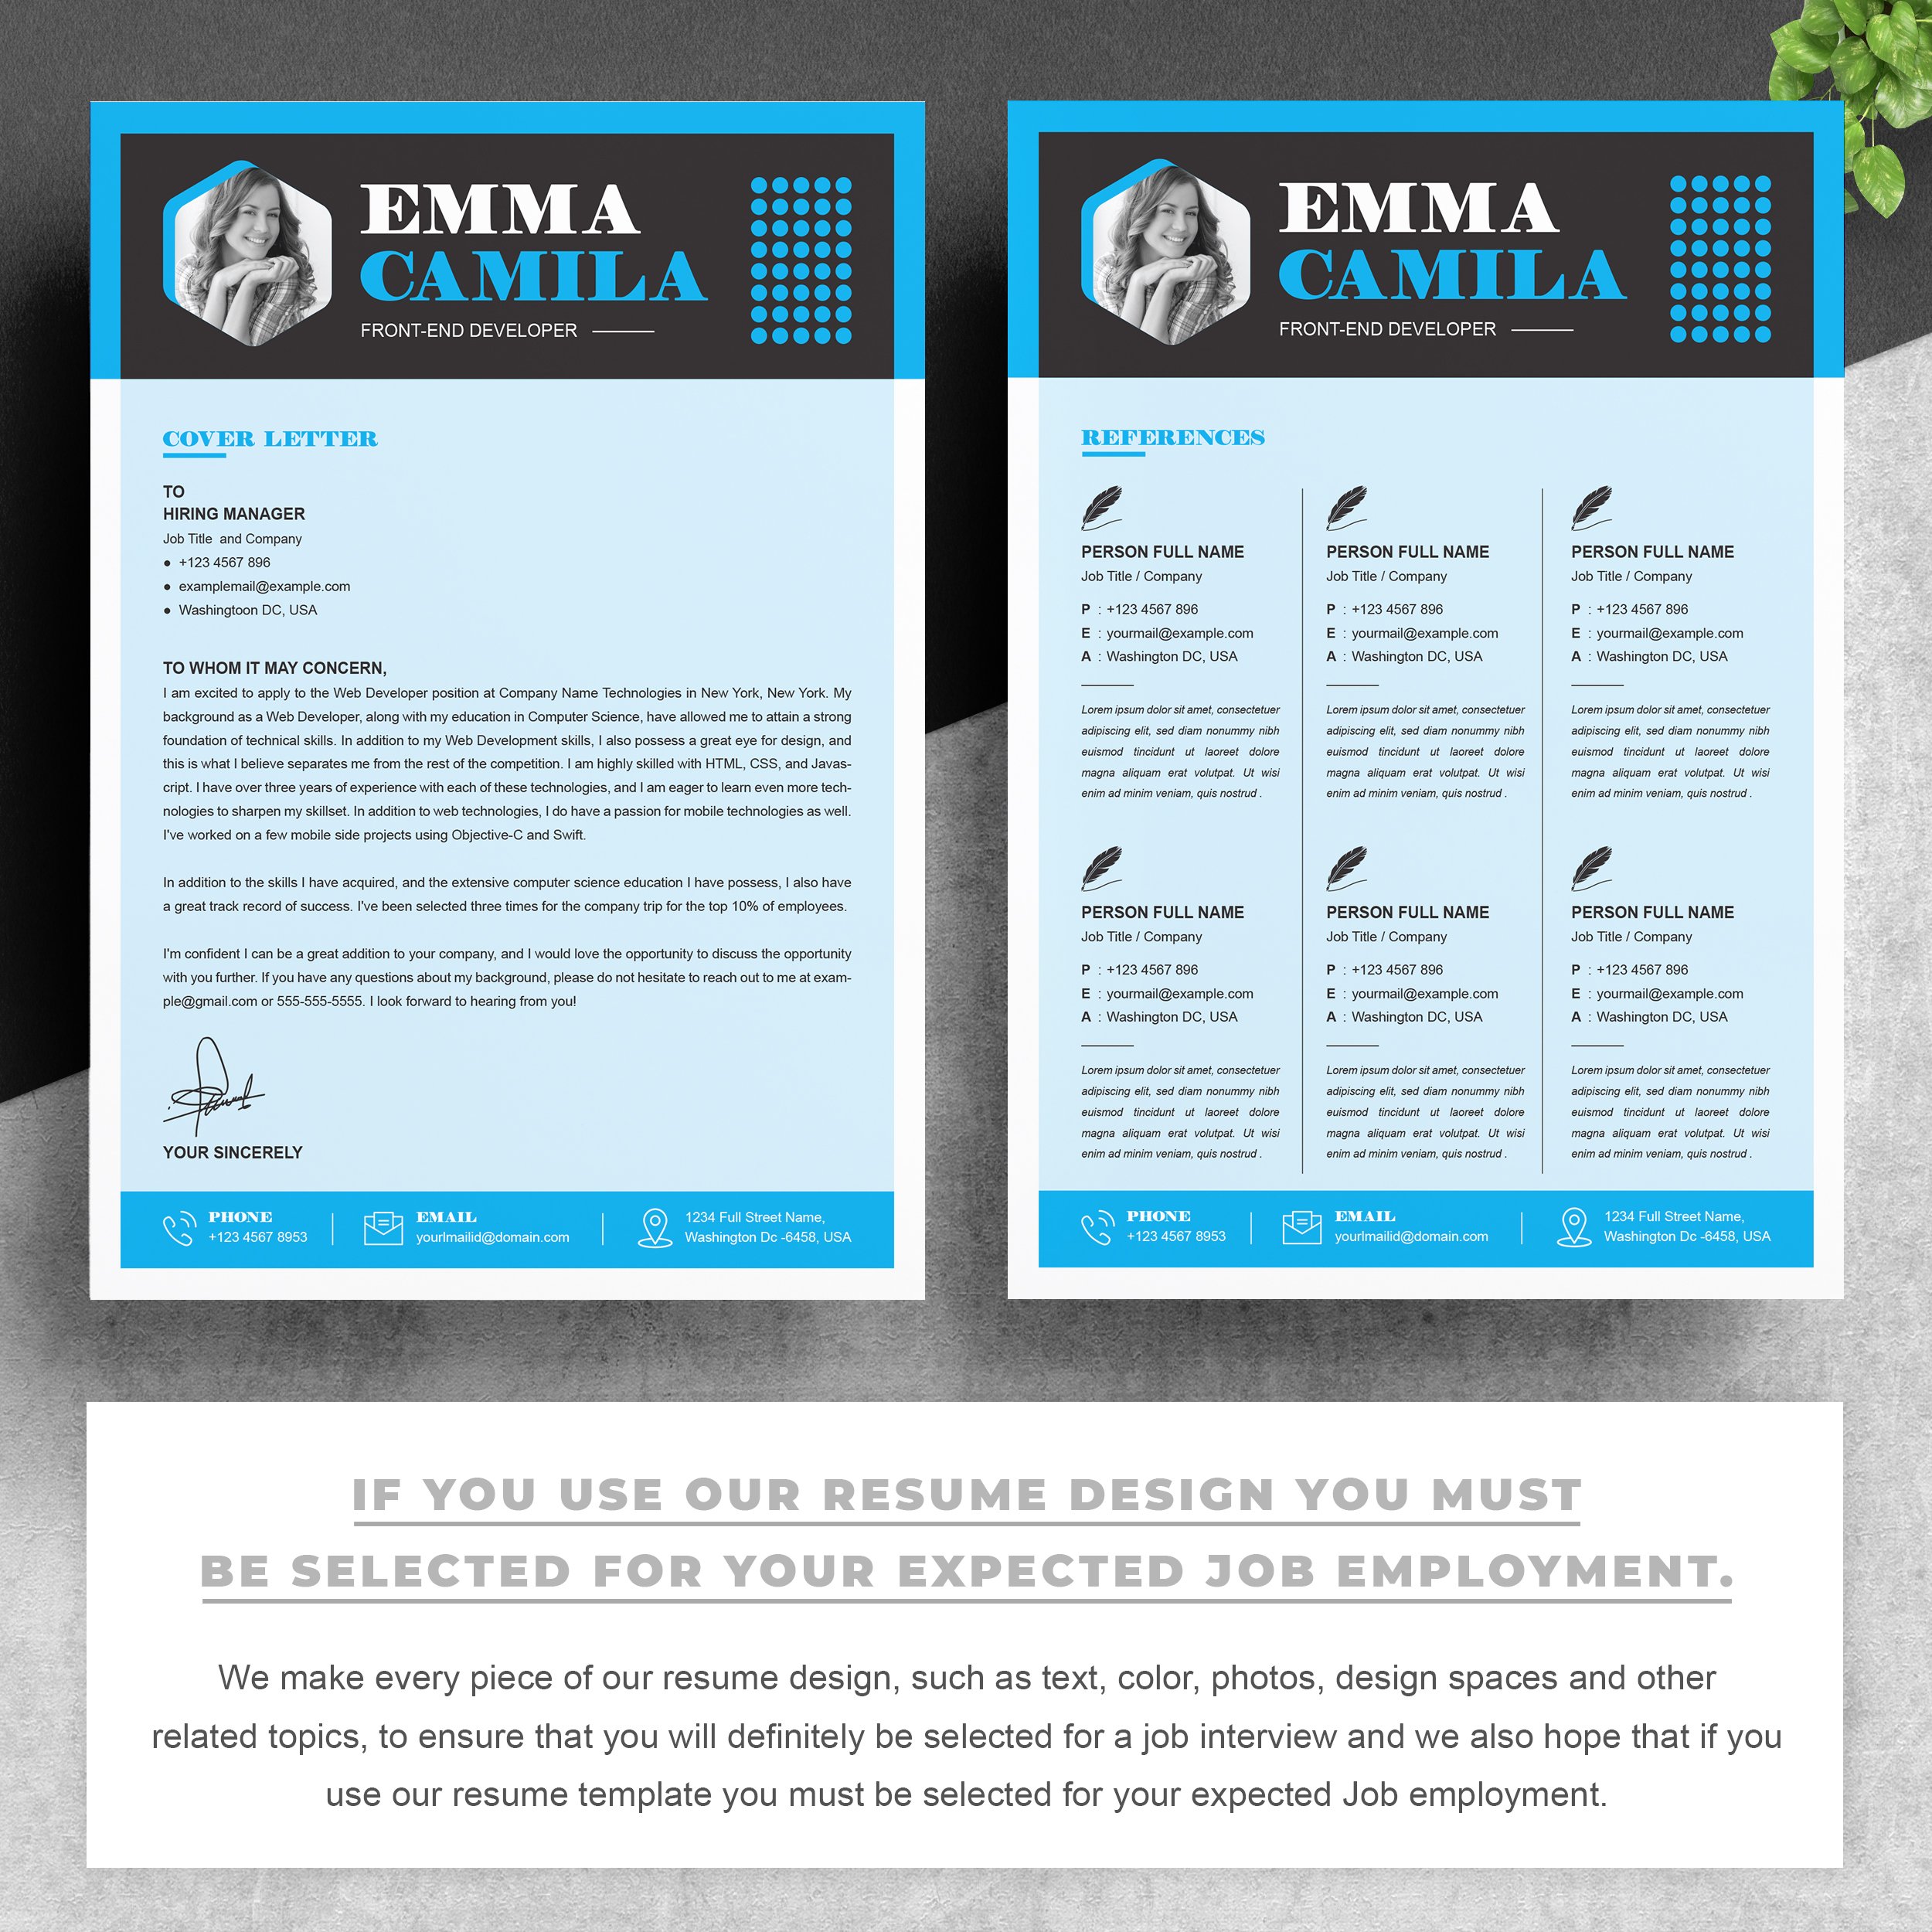 03 2 pages free resume design template copy 4